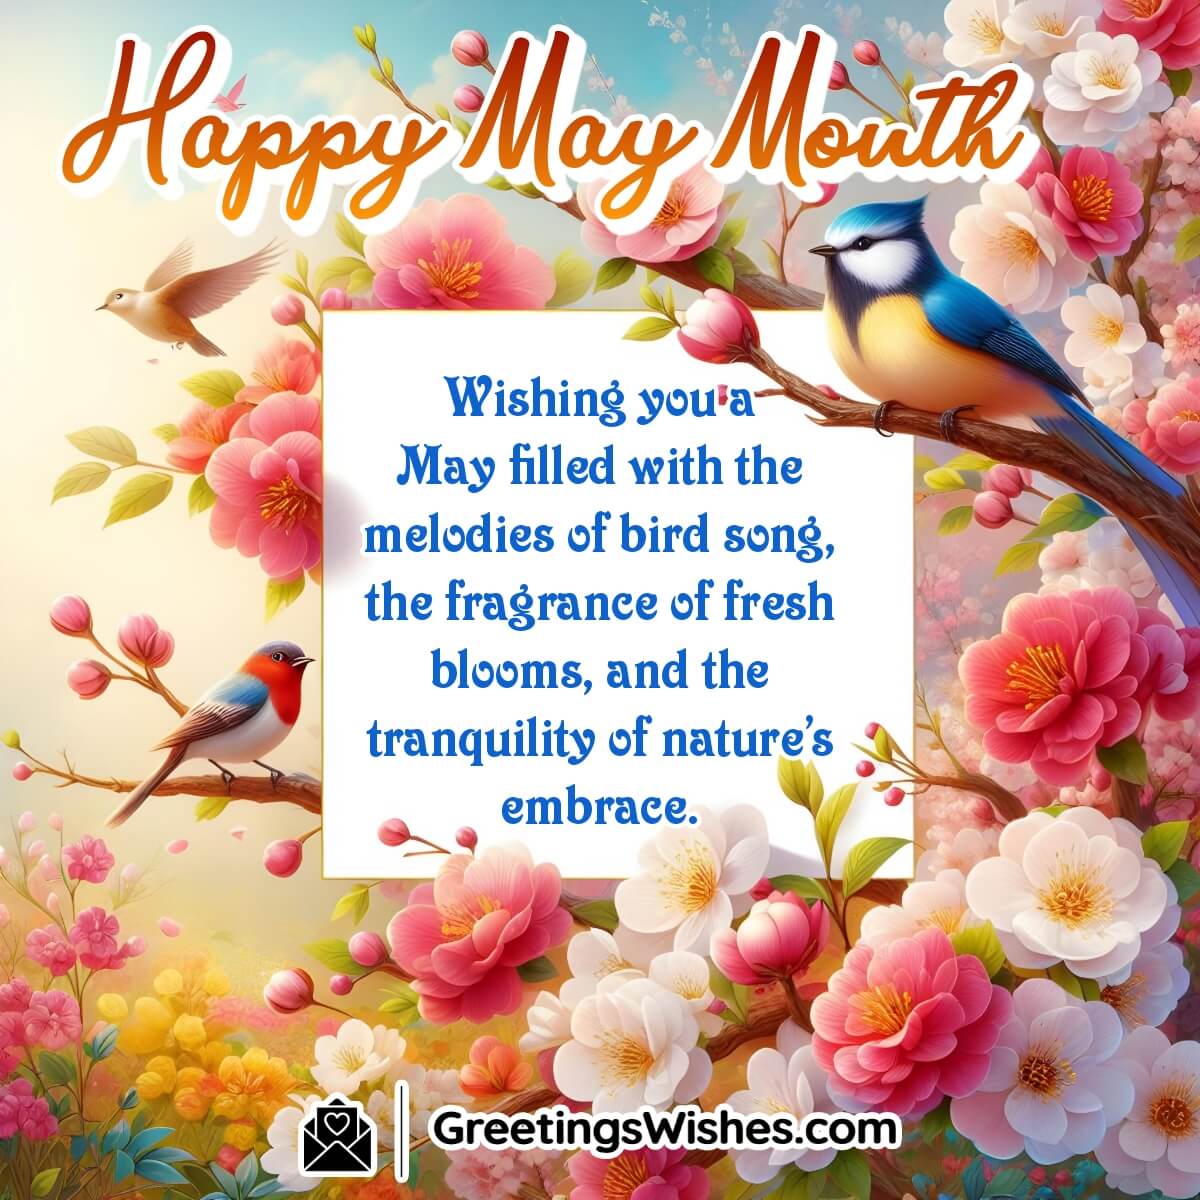 Happy May Month Wish Image